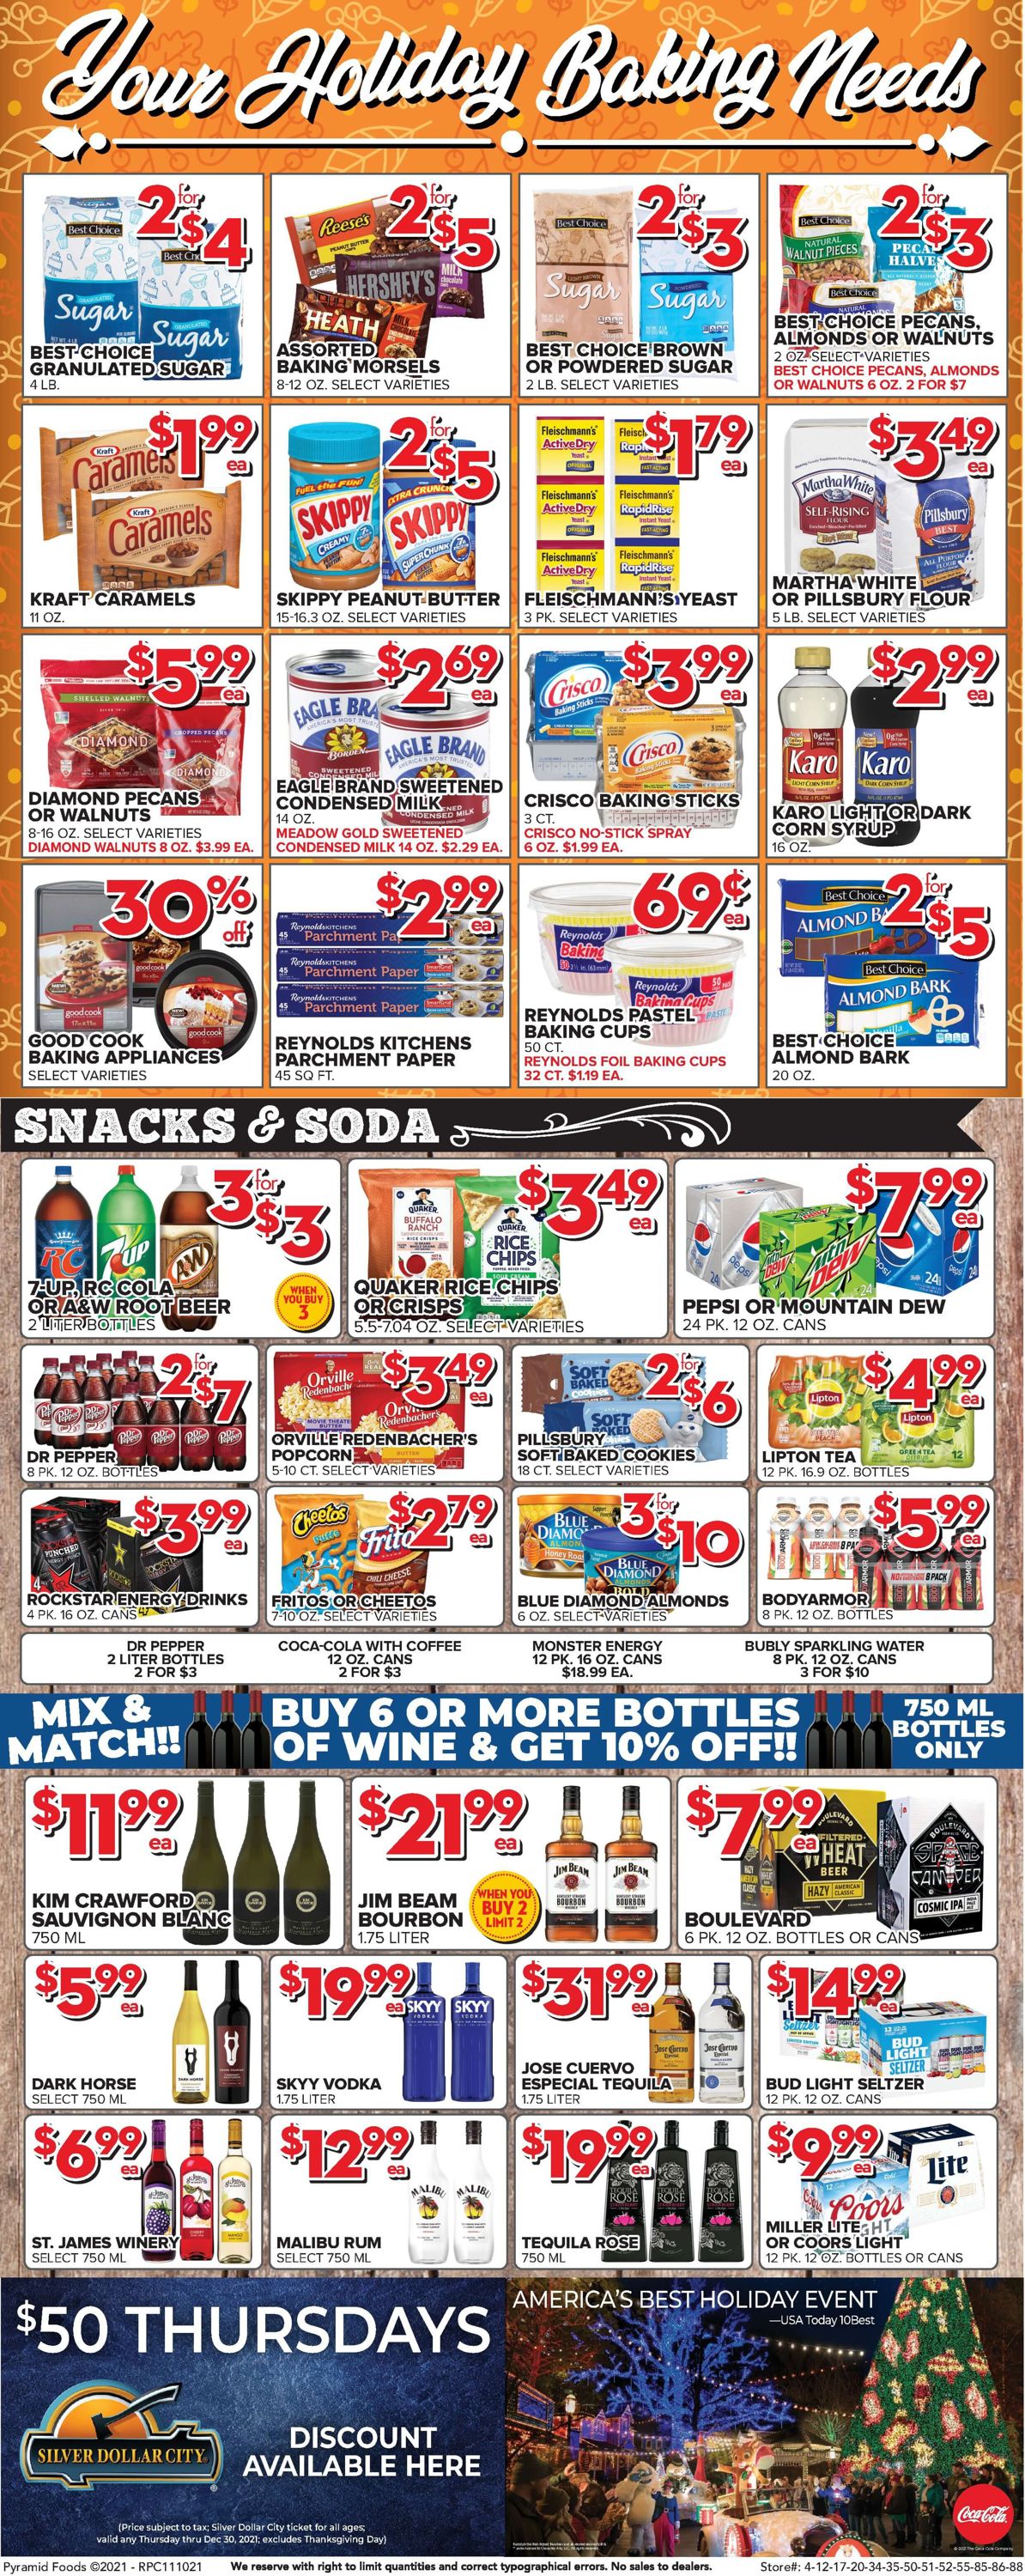 Price Cutter HOLIDAY 2021 Weekly Ad Circular - valid 11/10-11/16/2021 (Page 4)